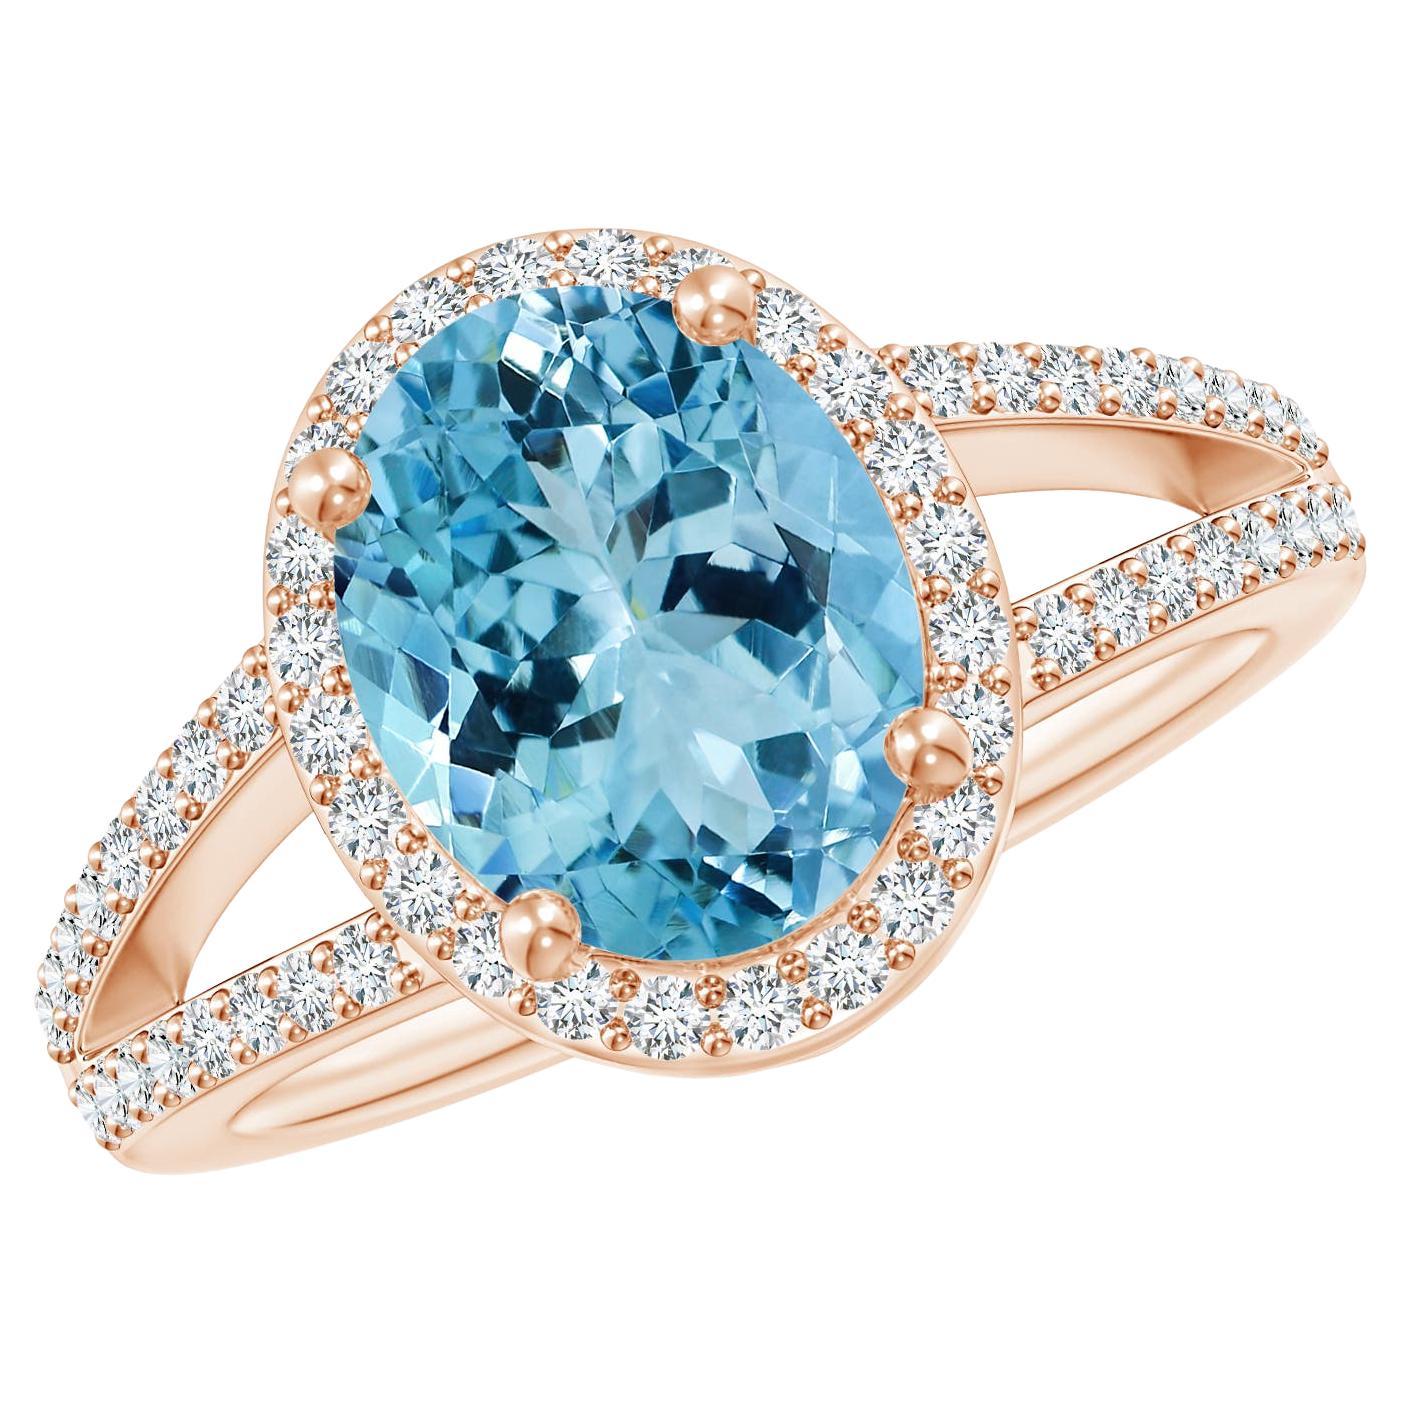 For Sale:  Angara Gia Certified Natural Aquamarine Halo Ring in Rose Gold